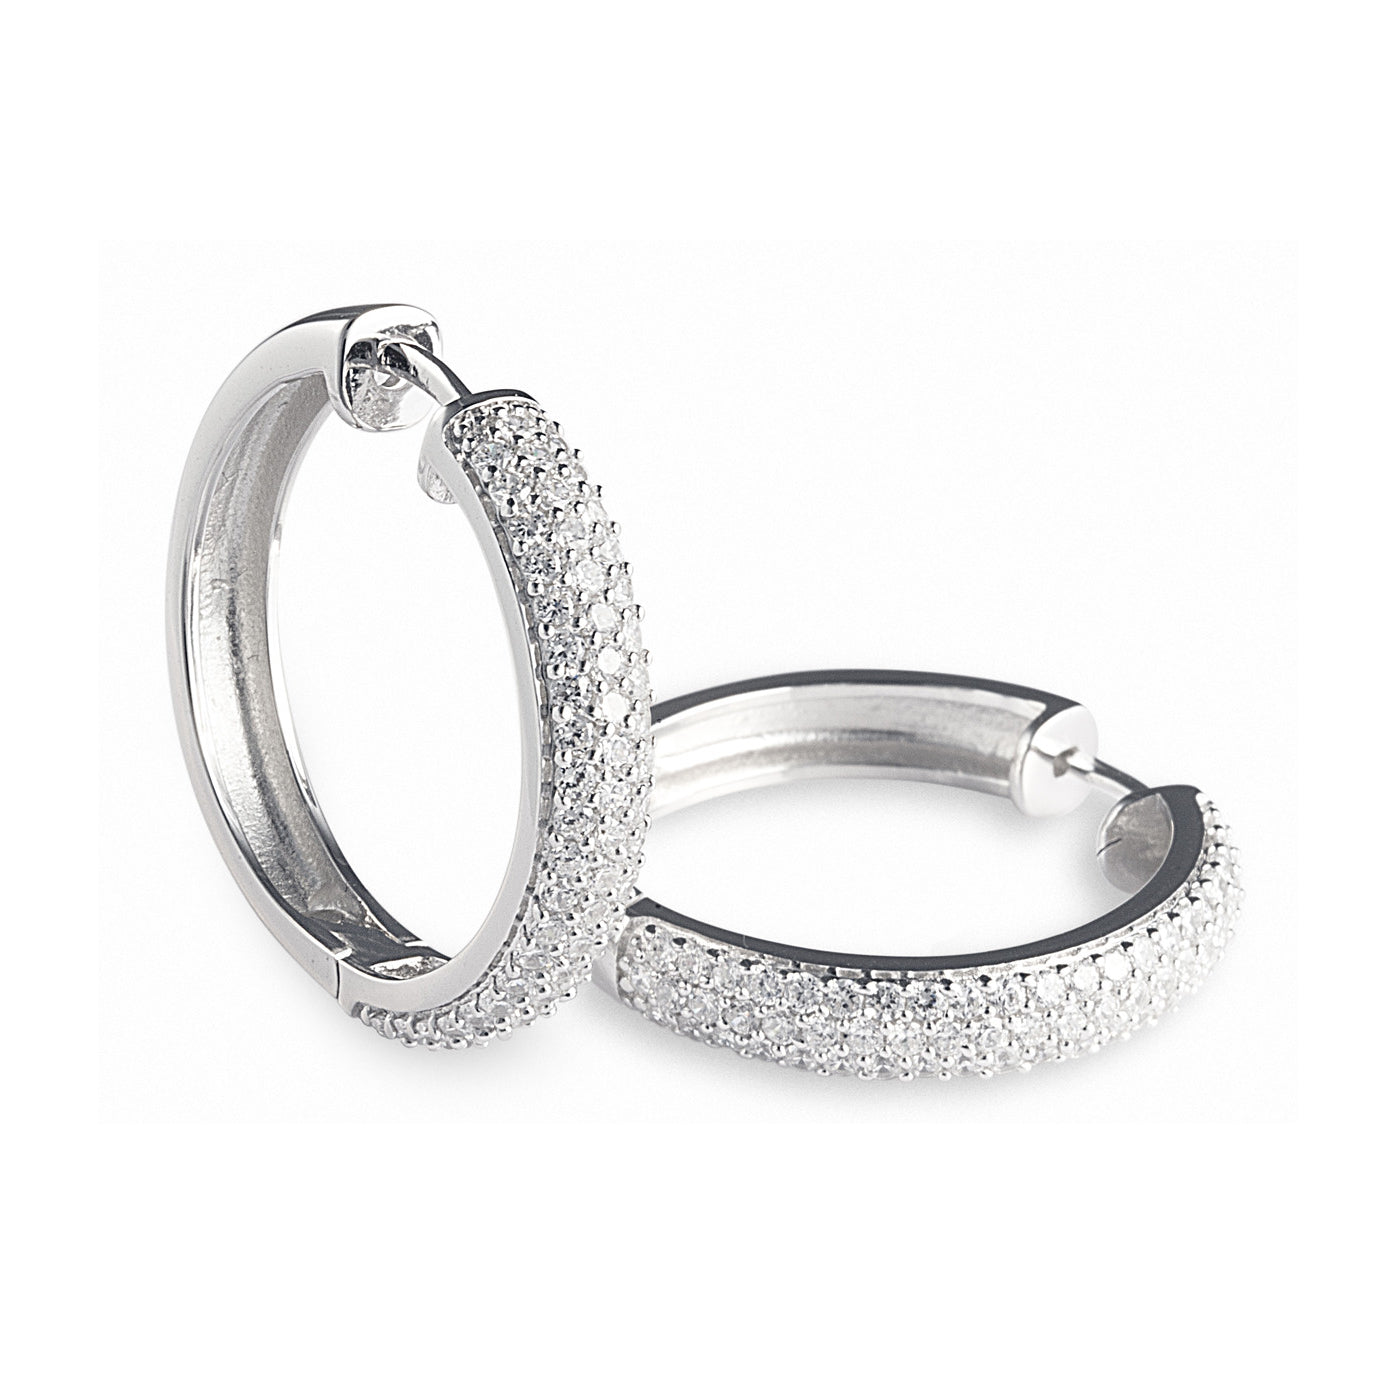 J-Lo Hoop Earrings - Elegant medium-sized 925 sterling silver hoops that are encrusted with sparkling cubic zirconia stones in a stunning pavé setting. 